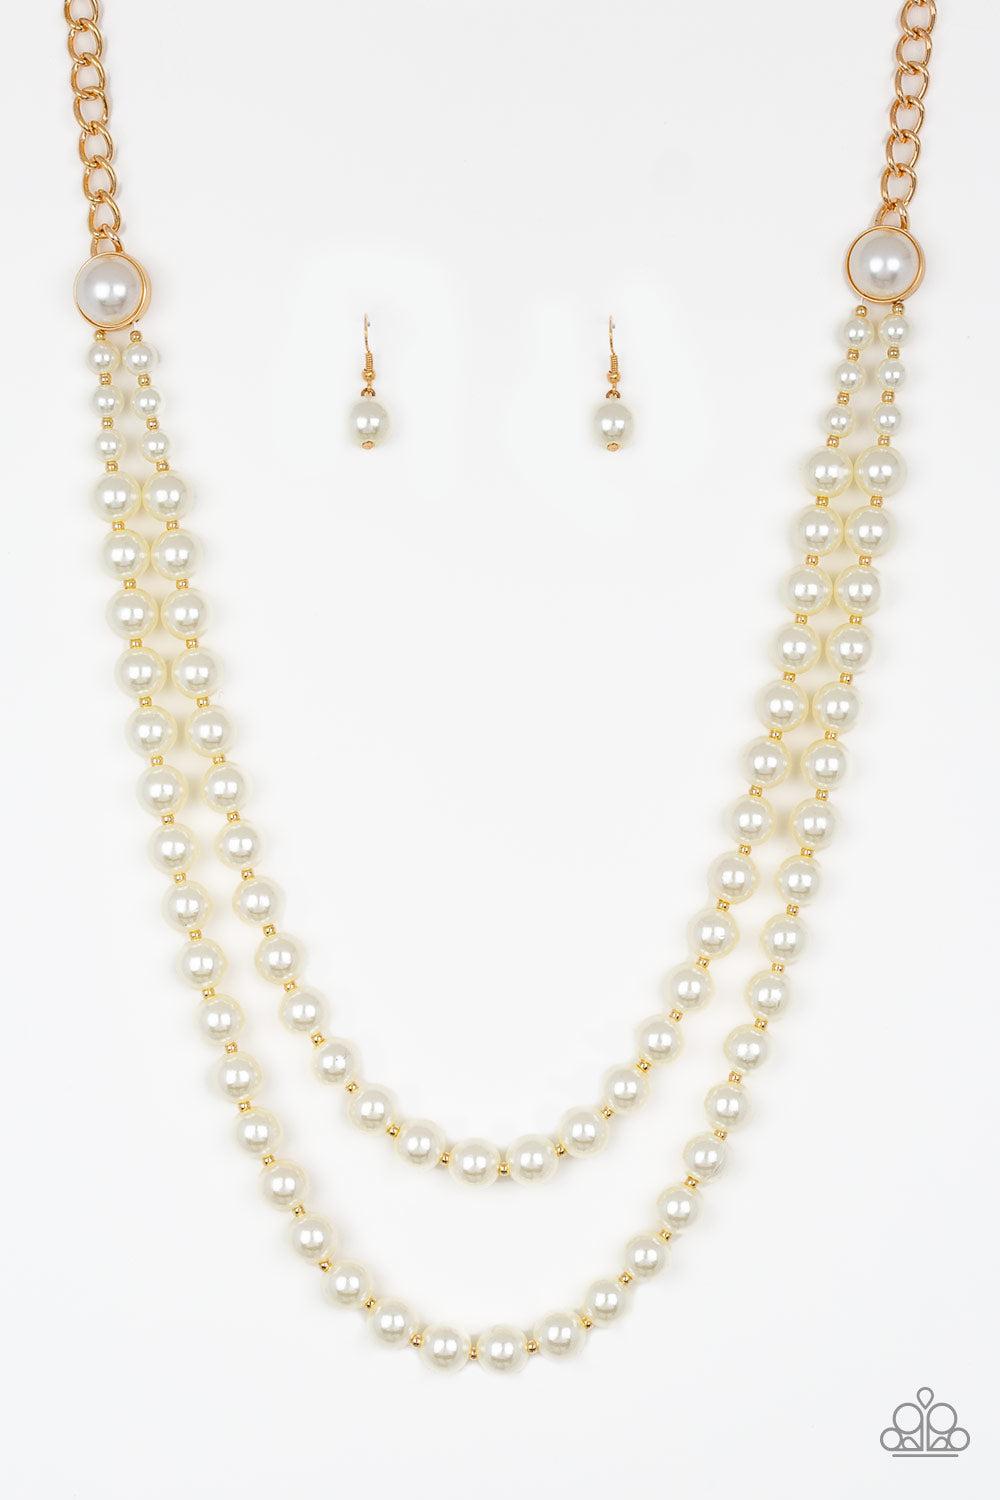 Endless Elegance - Gold Necklace - TheMasterCollection